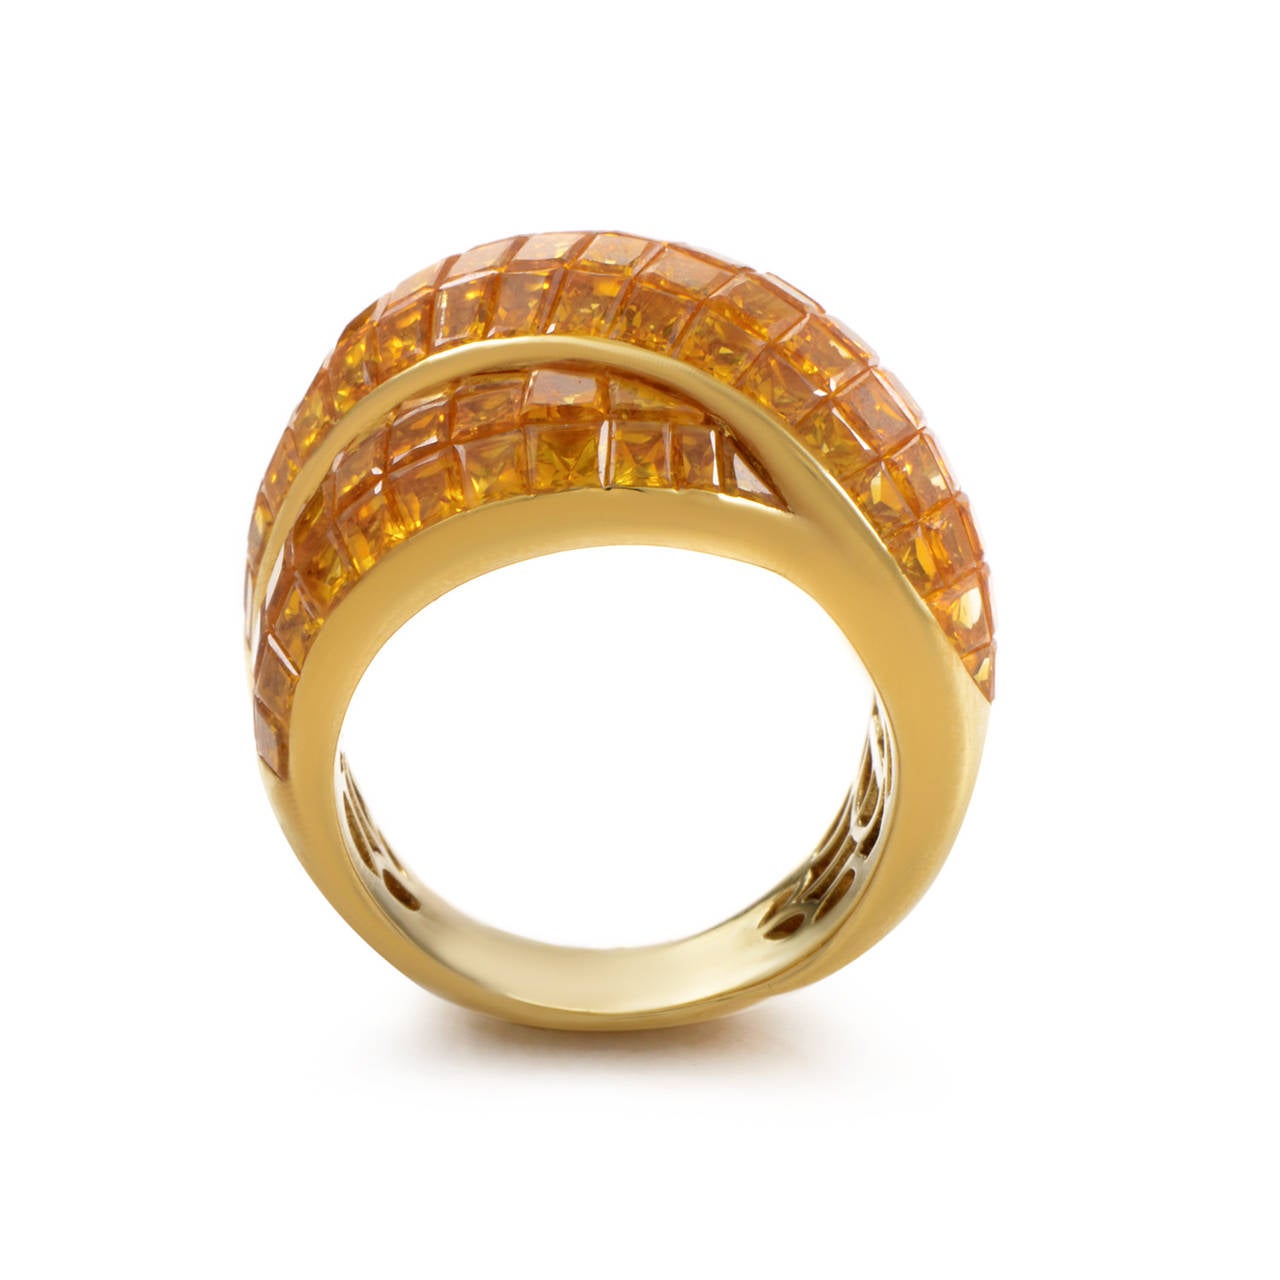 Boasting a captivating combination of radiant 18K yellow gold and attractive yellow sapphires this Damiani ring is a piece that will not go unnoticed; the ring weighs 18 grams while the sapphire stones total 7.50 carats.
Ring Size: 7.0 (54)